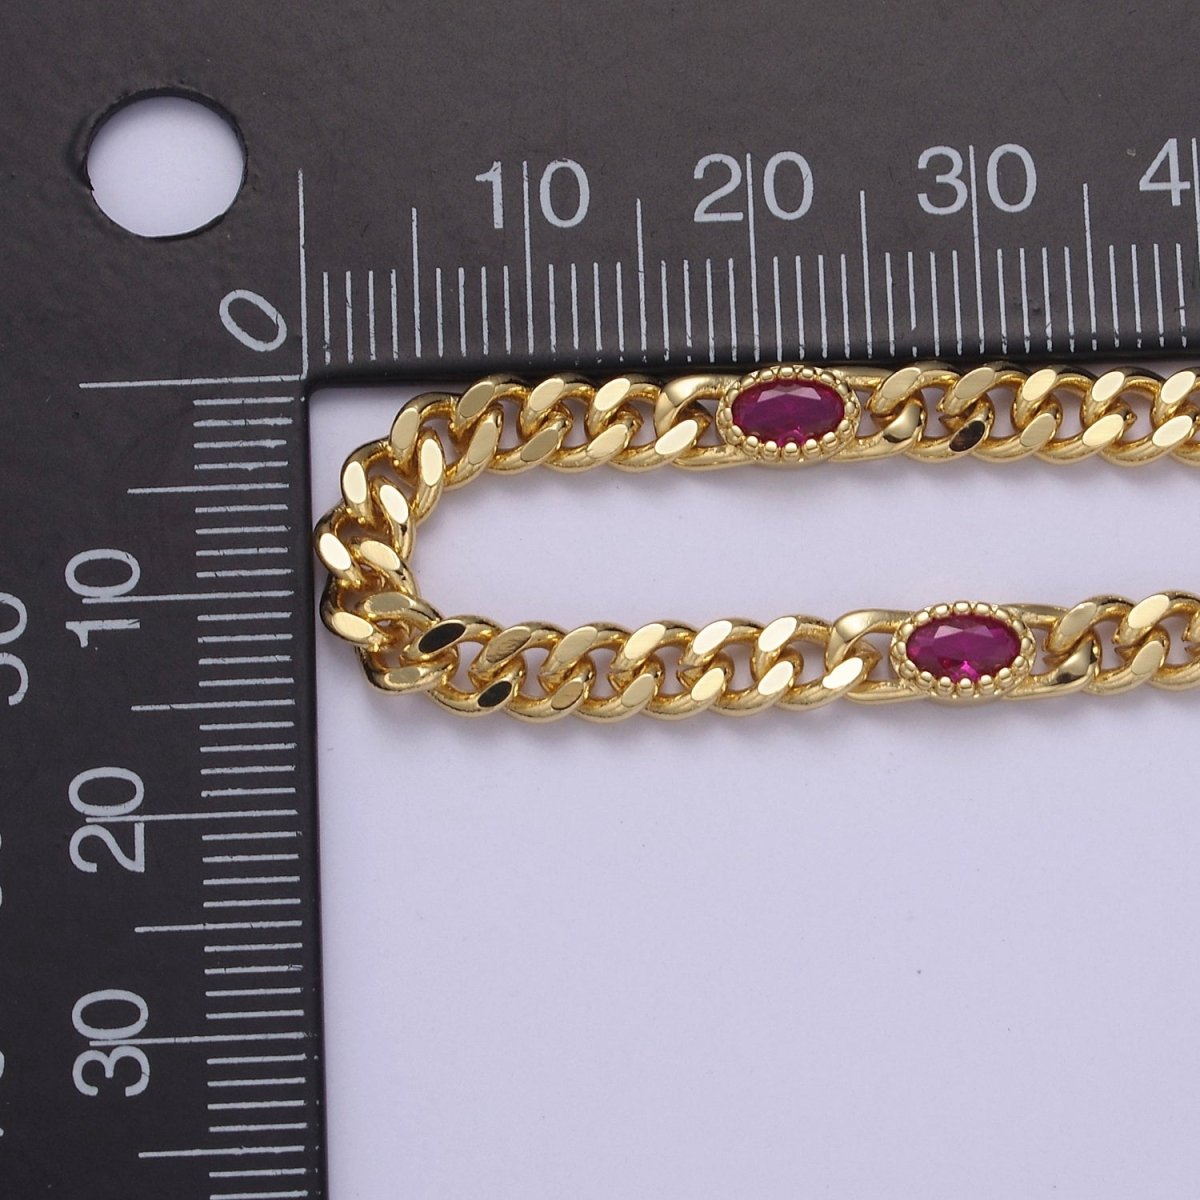 24K Gold Filled Flat Curb Chain with Oval Crystal Cubic Zirconia CZ Connector, 4.5mm in Width Unfinished Curb Chain by Meter | O-087 ~ O-089 WA-1366 - WA-1367 Clearance Pricing - DLUXCA